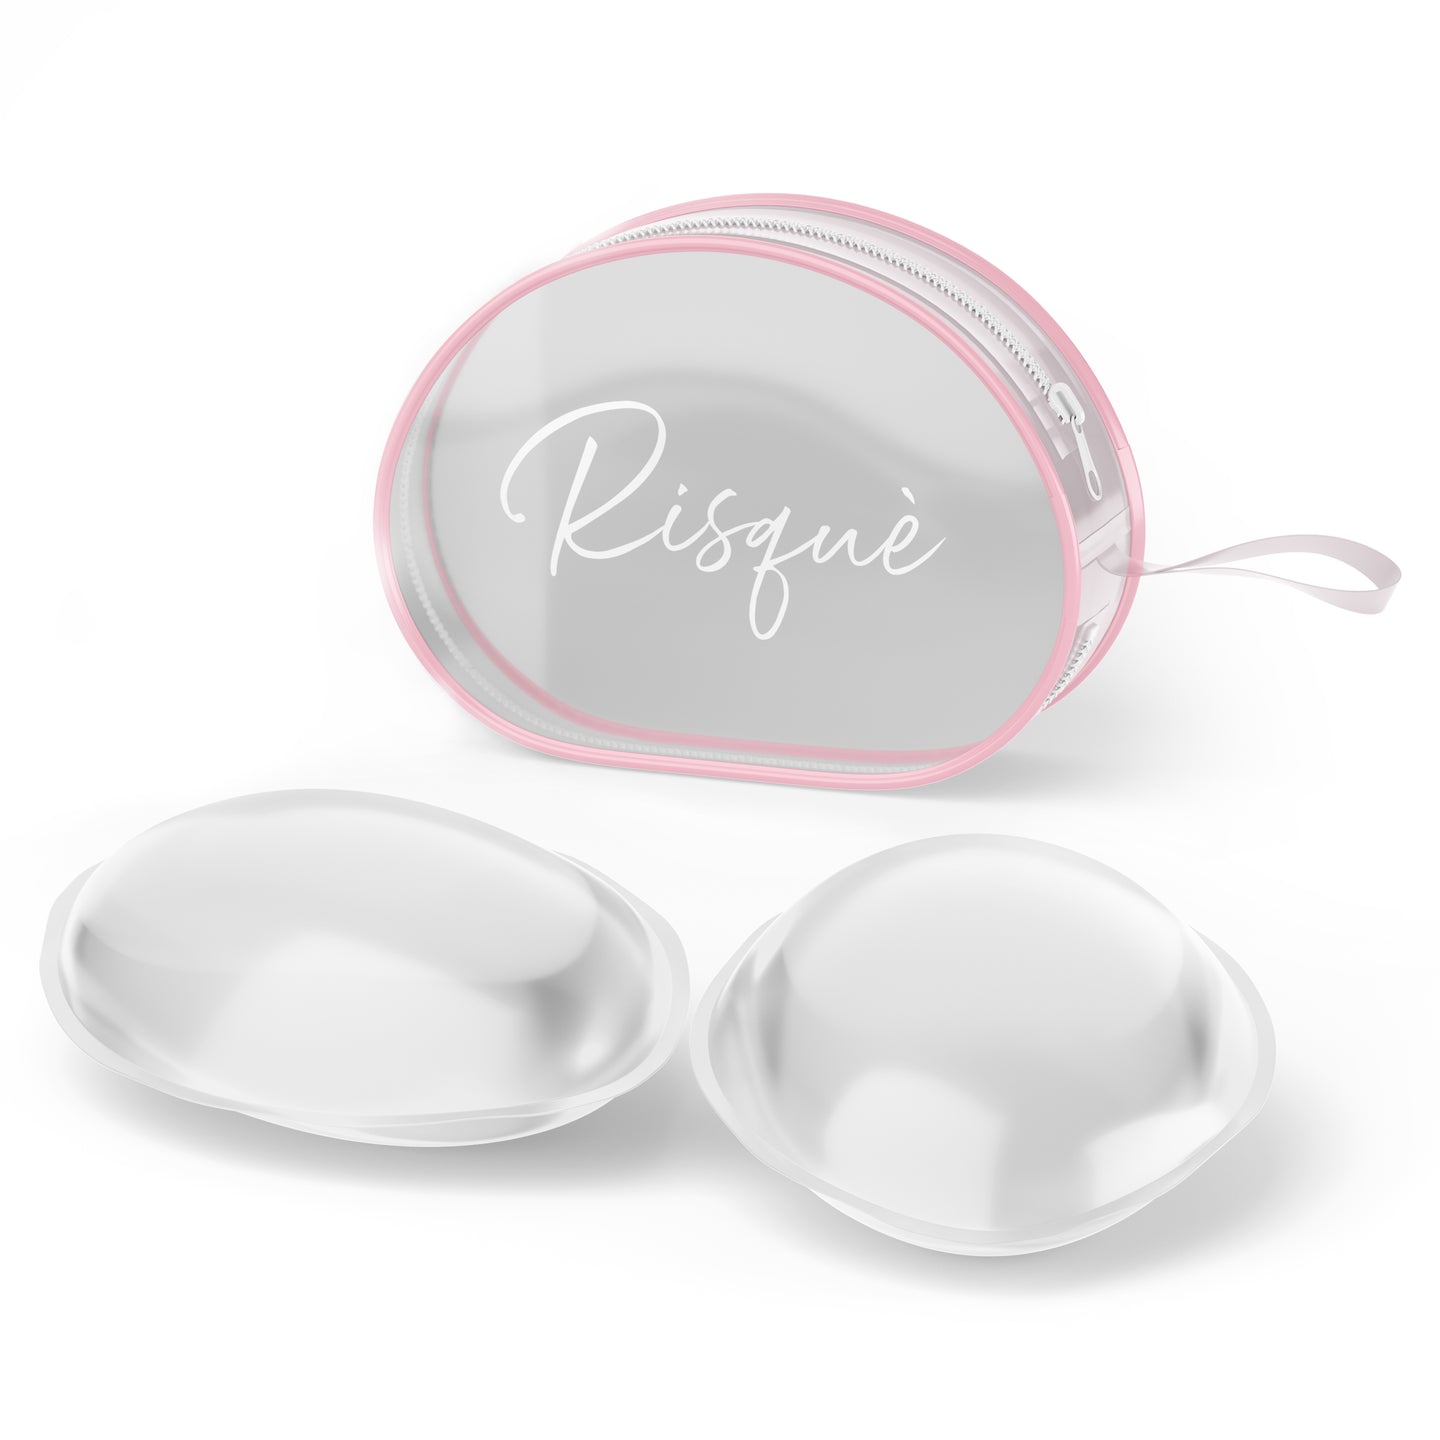 A.gerolez Silicone Bra Inserts, 2 Cup Sizes Larger Gel Pads